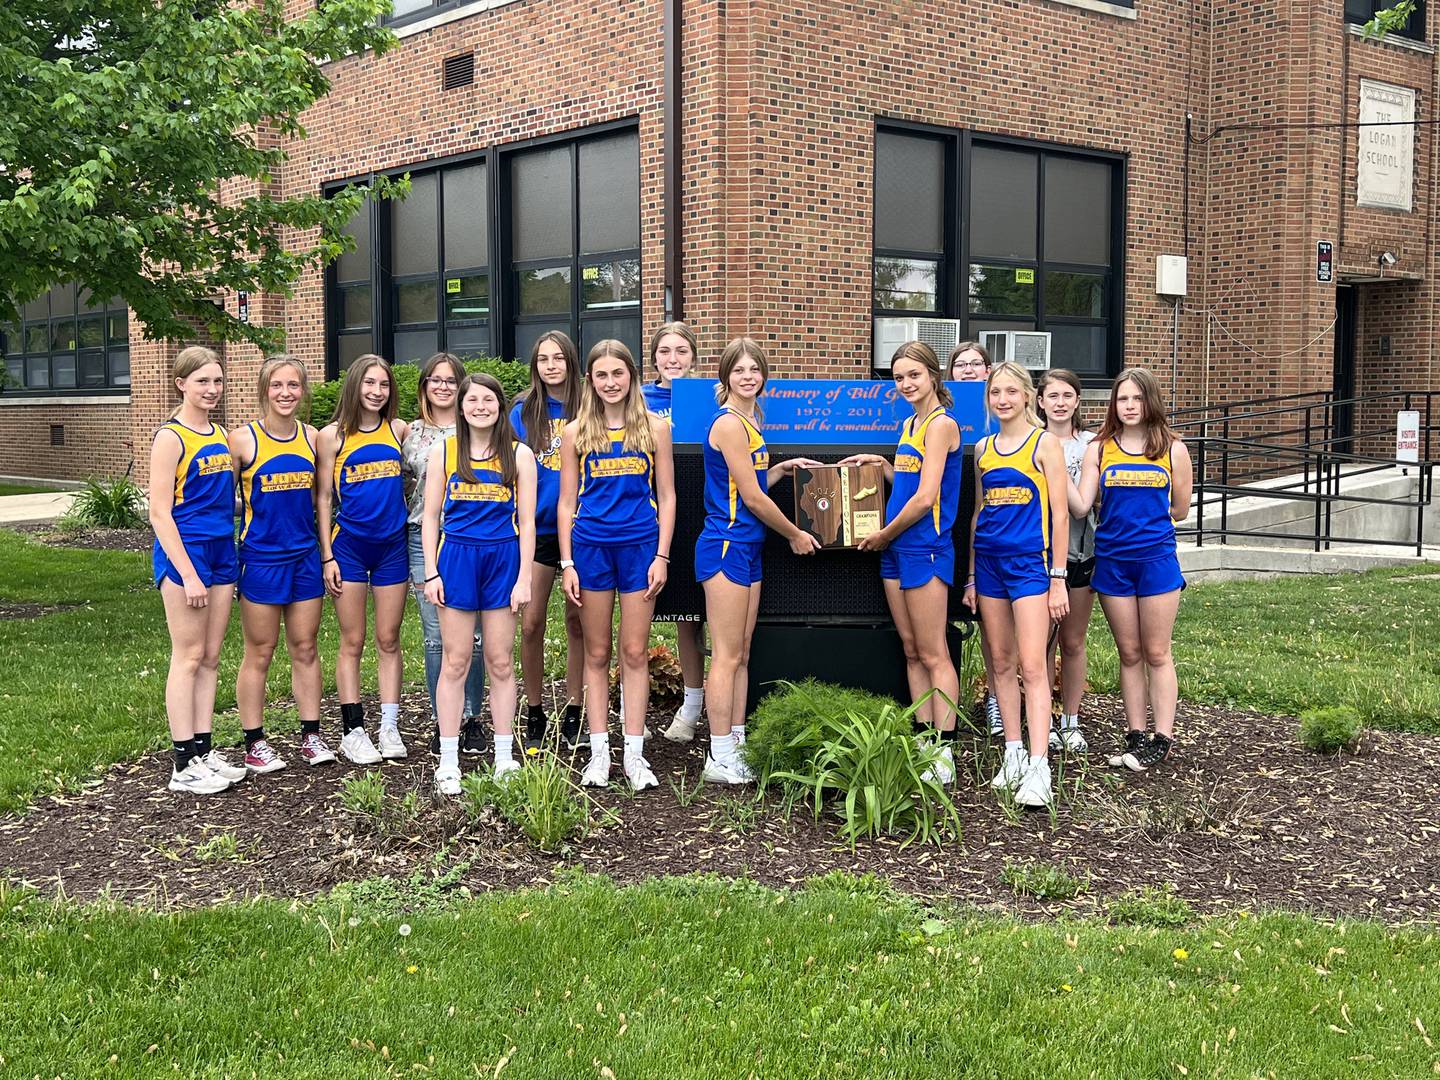 The Logan Junior High eighth grade girls track team won the sectional championship at Sherrard. Team members are (front row, from left) Camryn Driscoll, Avery Waca, Caroline Keutzer, Keighley Davis and Chloe Ostrowski; and (back row) Payton Frueh, Ava Kyle, Ruby Acker, Bianka Nickelsen, Kathy Maciczak, Gracie Anderson, Anika Hansen, Audrey Thompson and Kaylee Plymire.